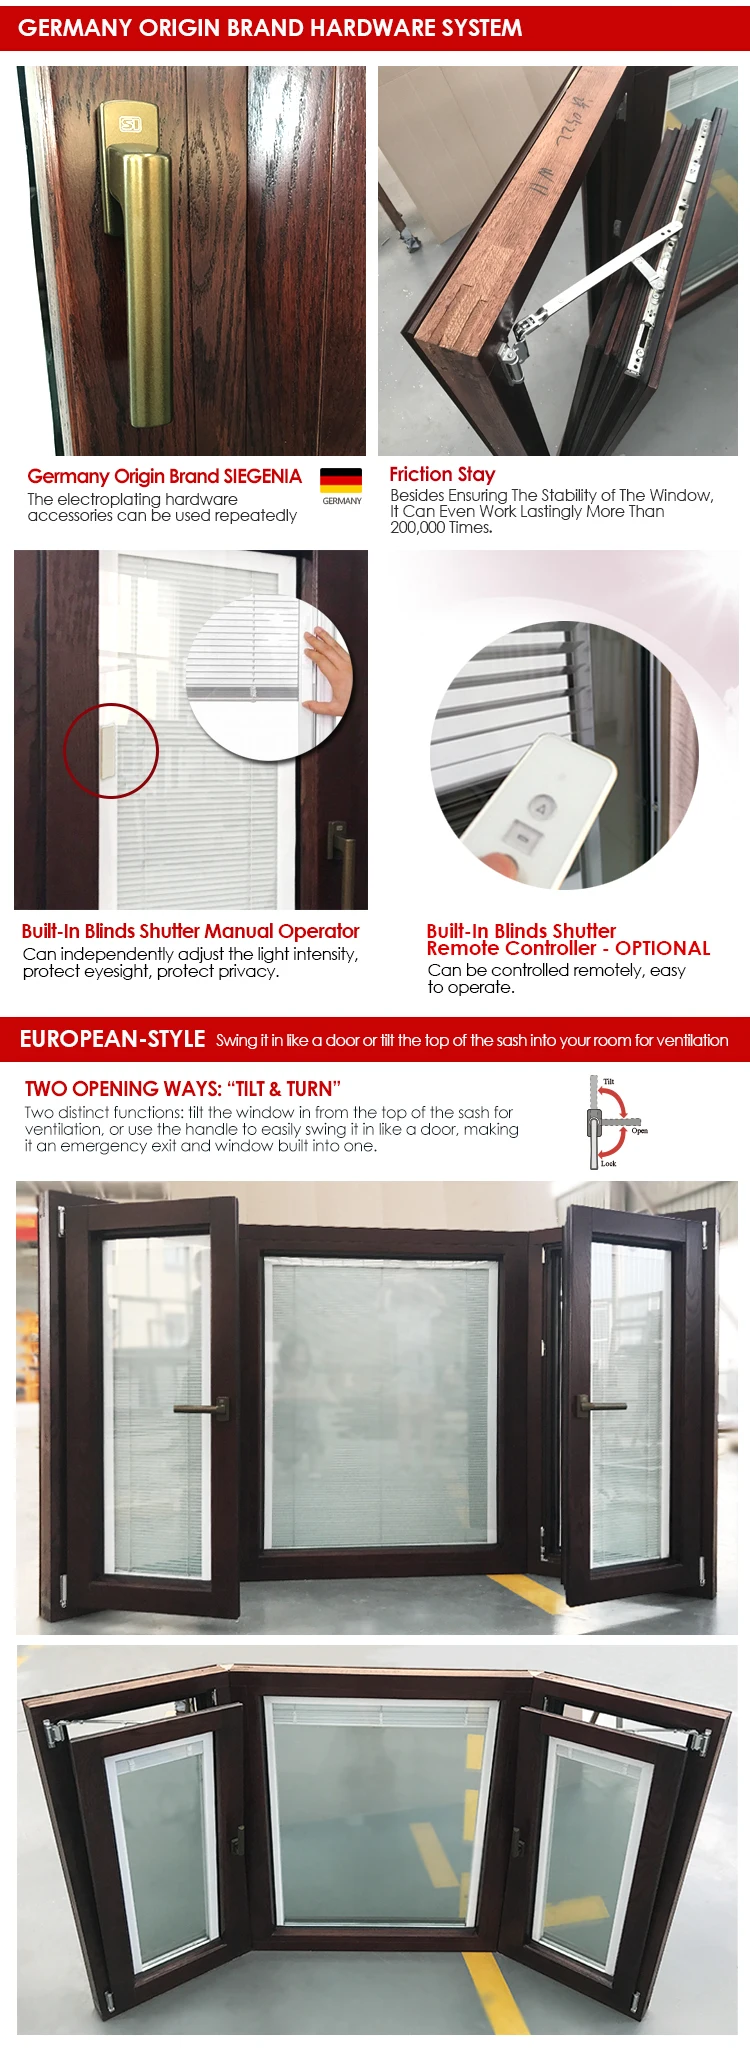 China Made Bay & Bow Large Size Aluminum Profiles protected American Red Oak Wood Window